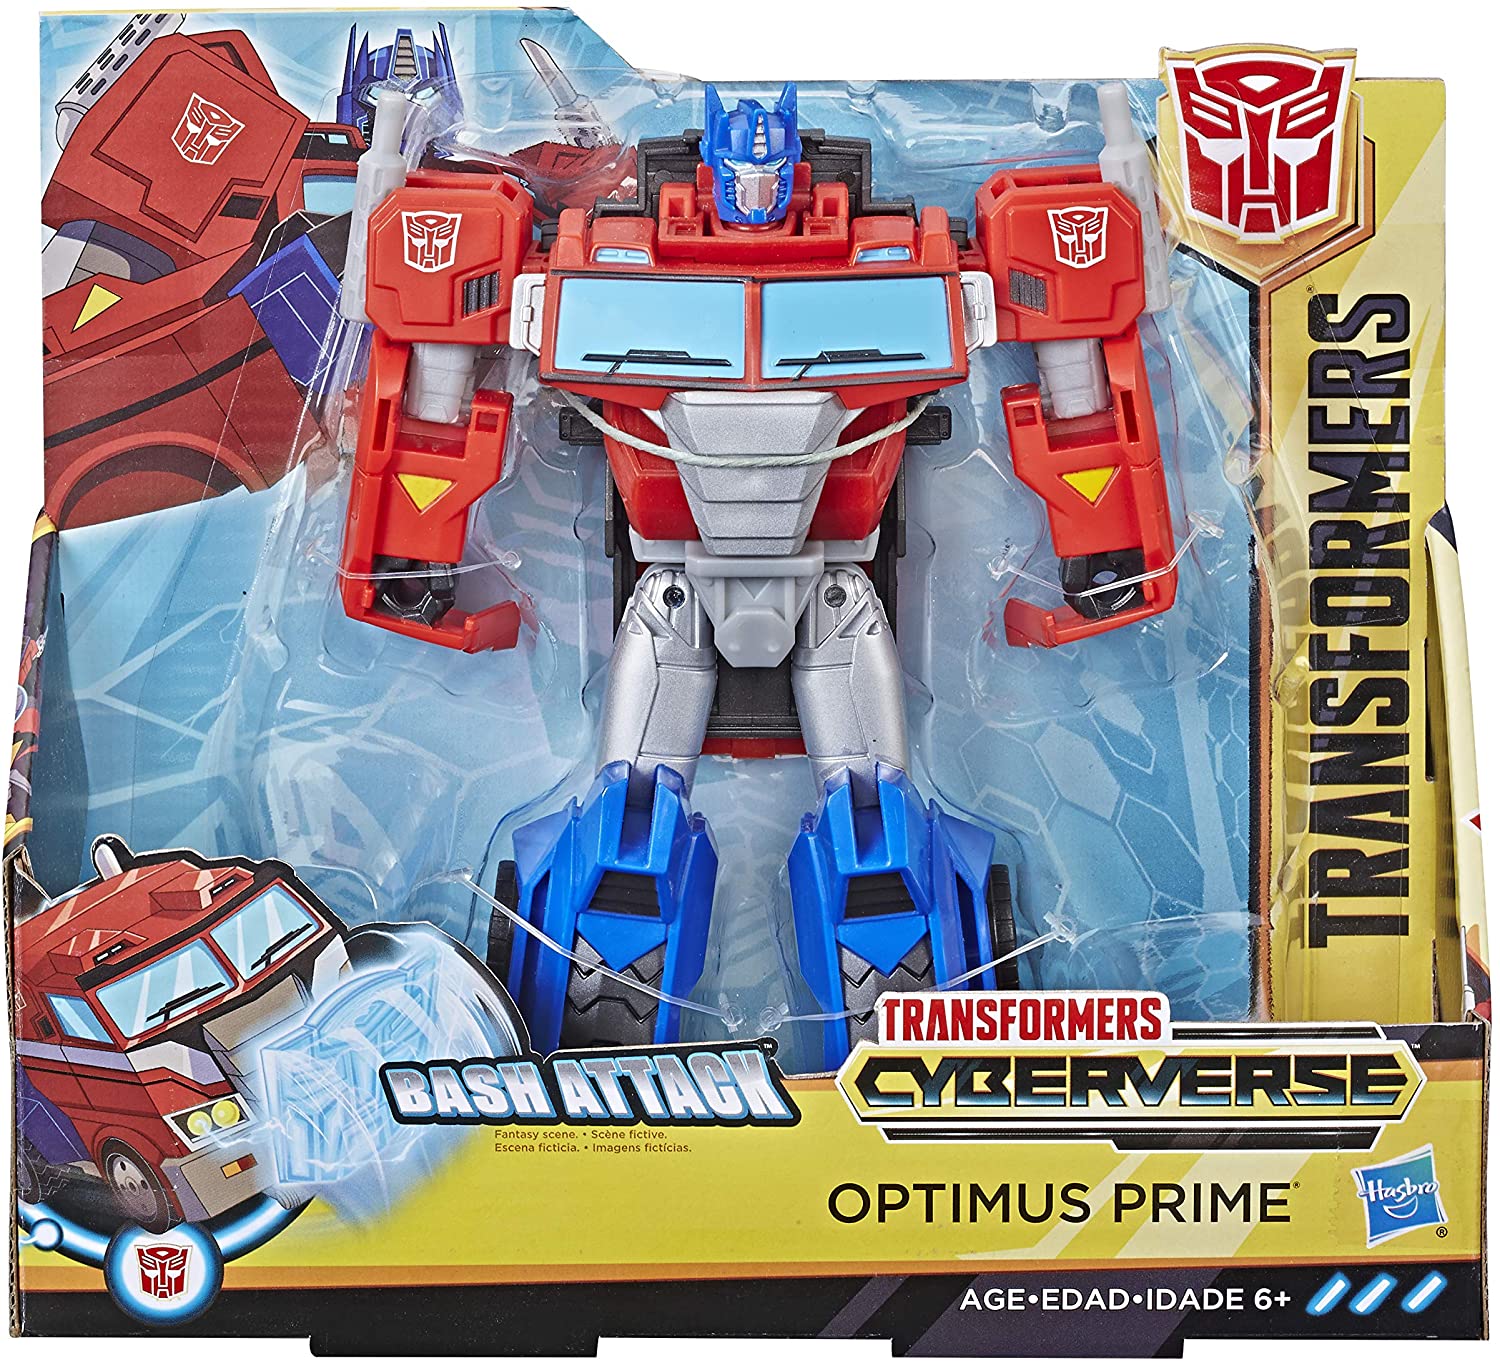 http://honestforwarder.com/uploads/product/PqZY2KyjWC-transformers-toys-cyberverse-action-attackers-ultra-class-optimus-prime-action-figure-repeatable-bash-action-attack-for-children-aged-6-19cm0.jpg